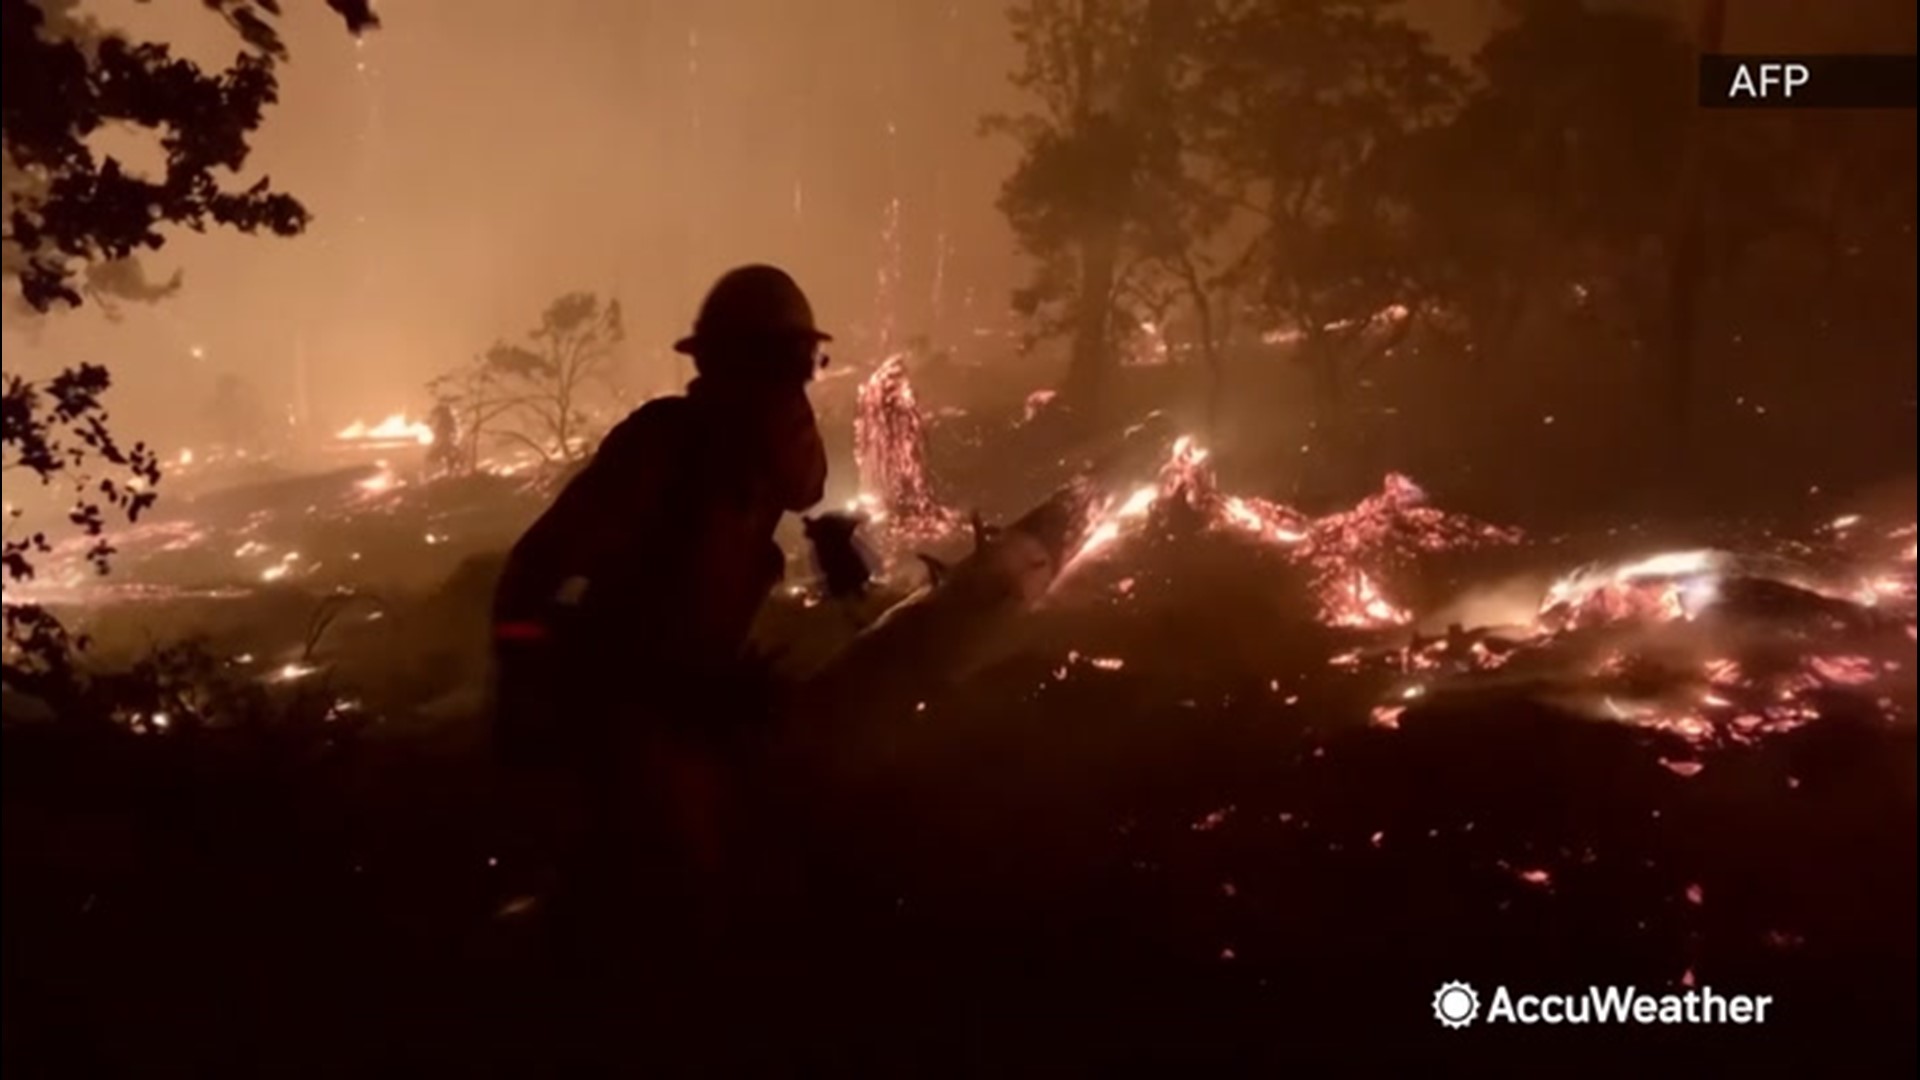 It has been a busy wildfire season across California, with millions of acres burned over the last several weeks.